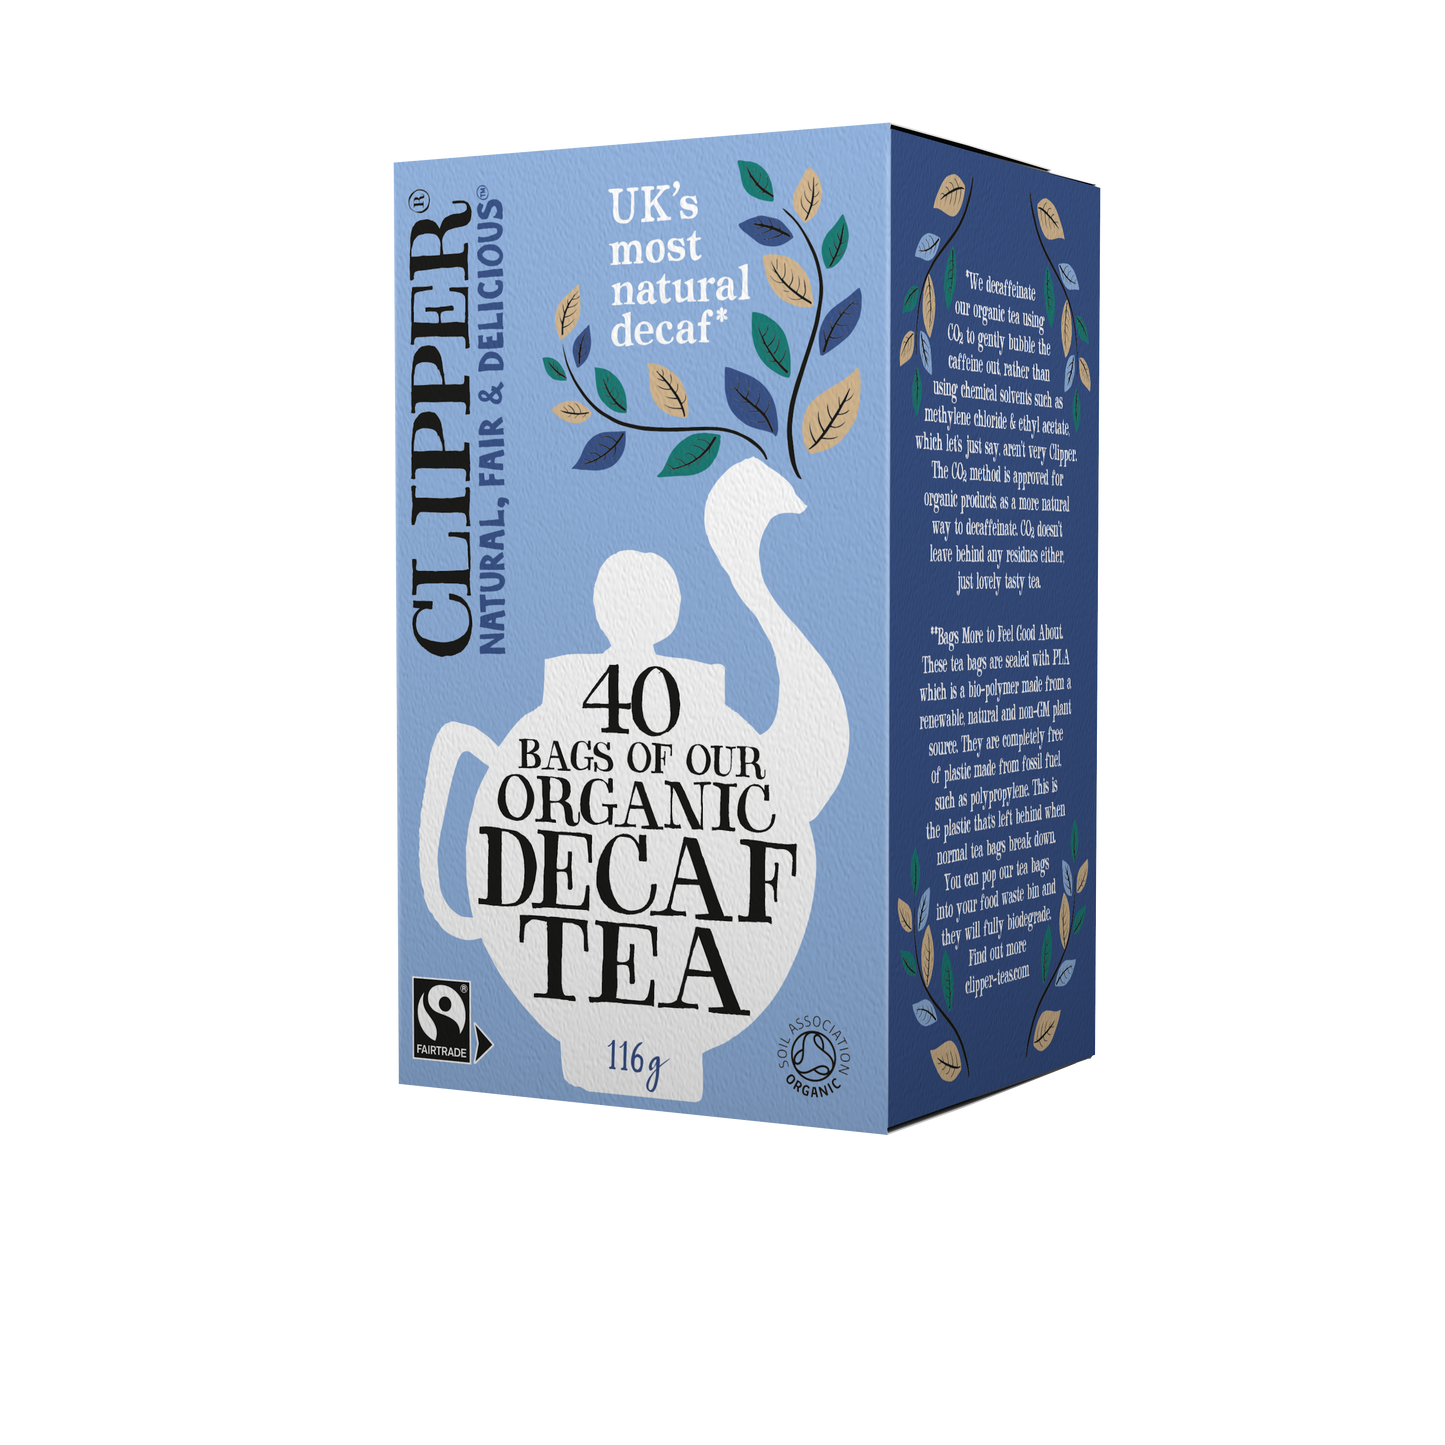 Decaf (Org) FT 40 Bags 45089A